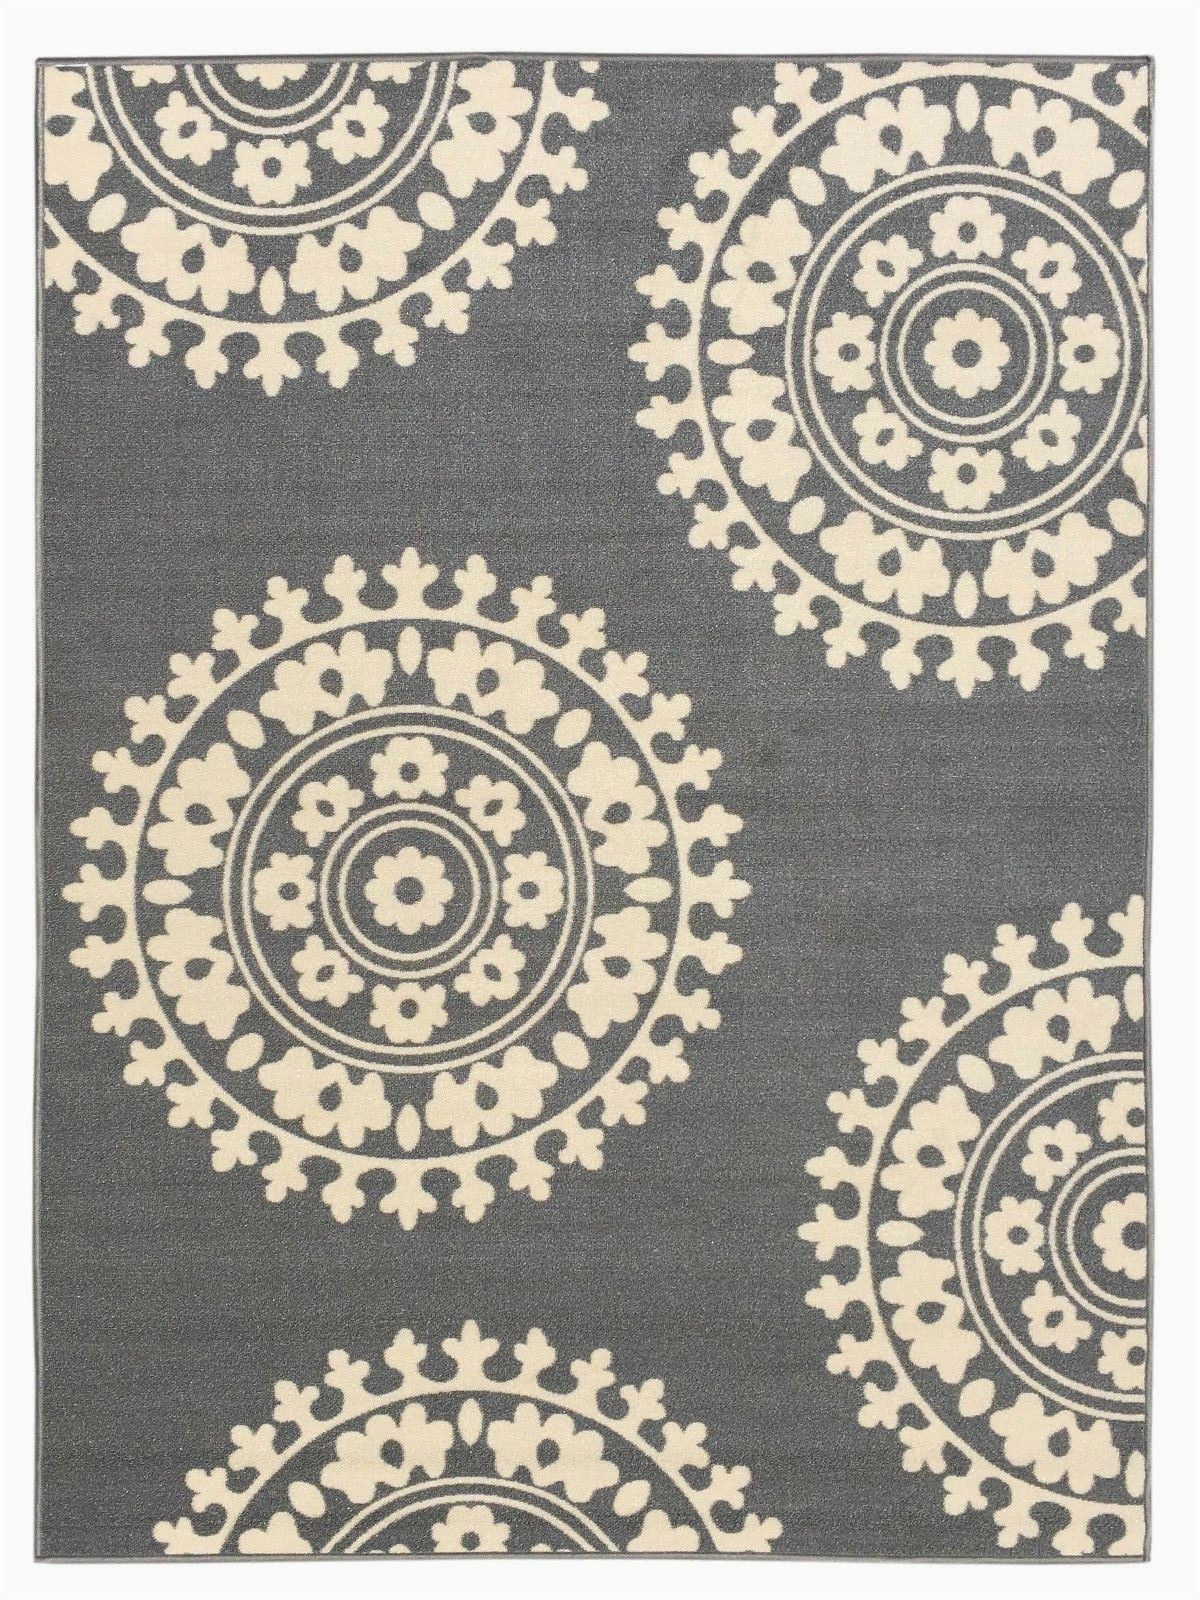 Rubber Backed 3×5 area Rugs Rubber Backed Non Skid Non Slip Gray Ivory Color Medallion Design area Rug